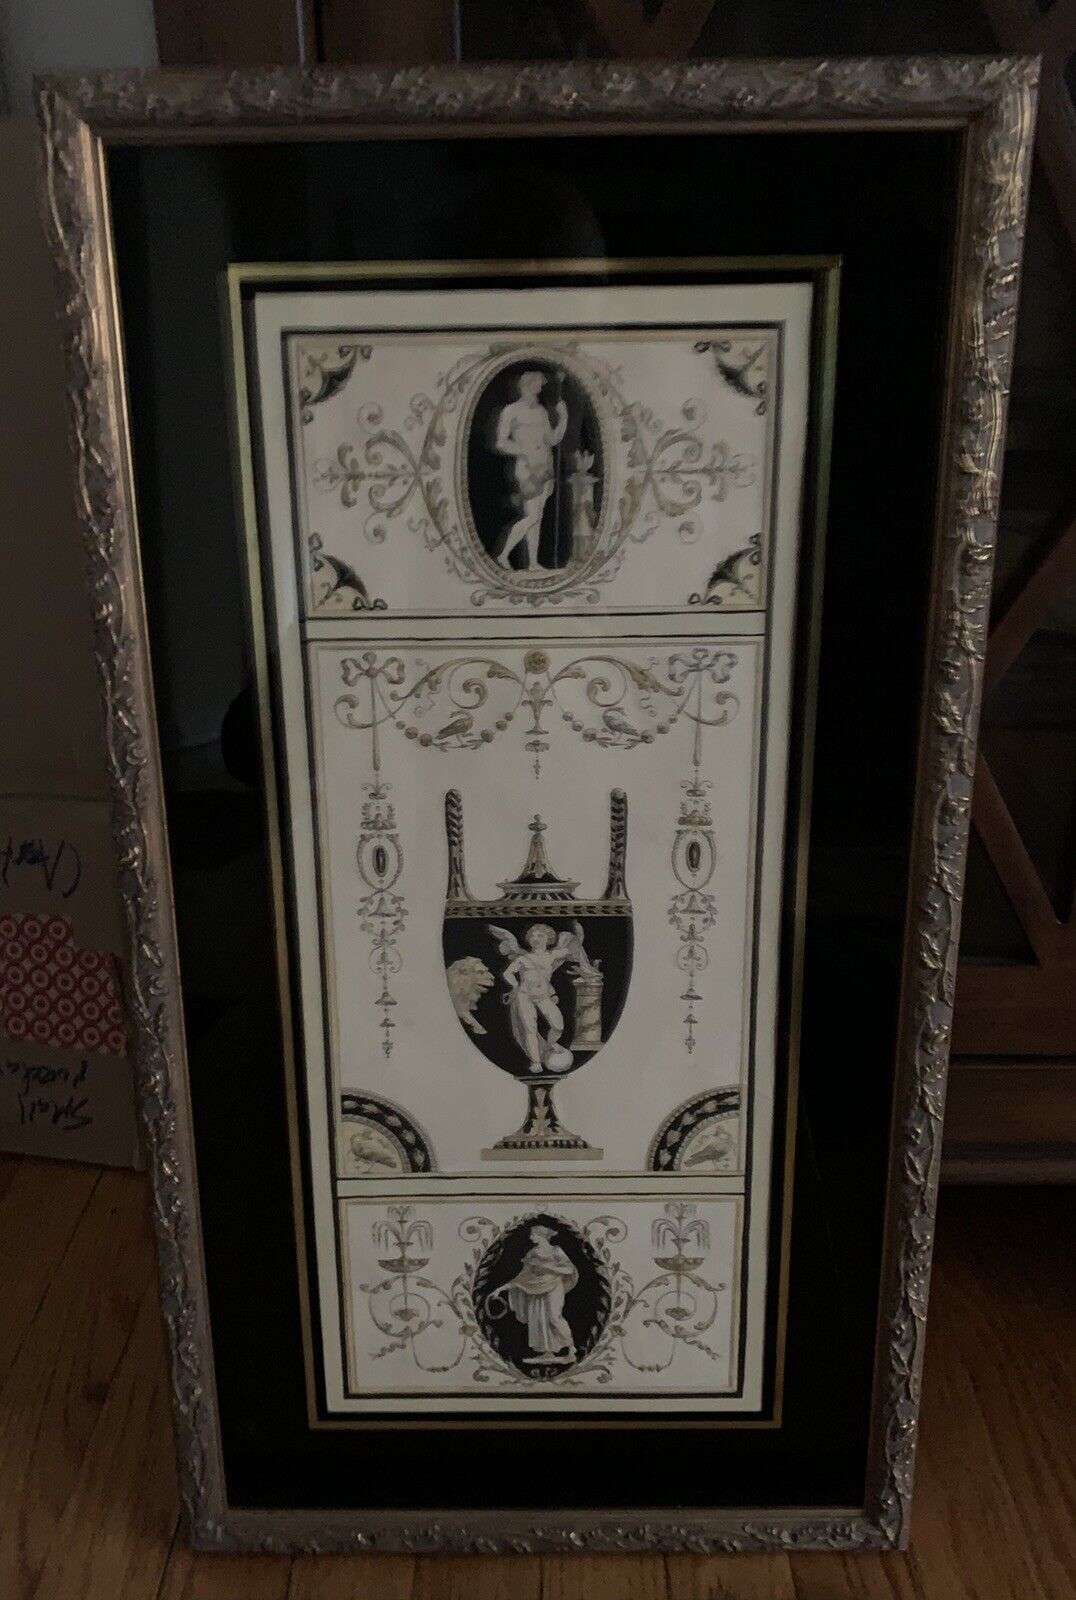 THREE ANTIQUE 18th CENTURY ITALIAN HAND-COLORED ENGRAVINGS - MATTED AND FRAMED Без бренда - фотография #3